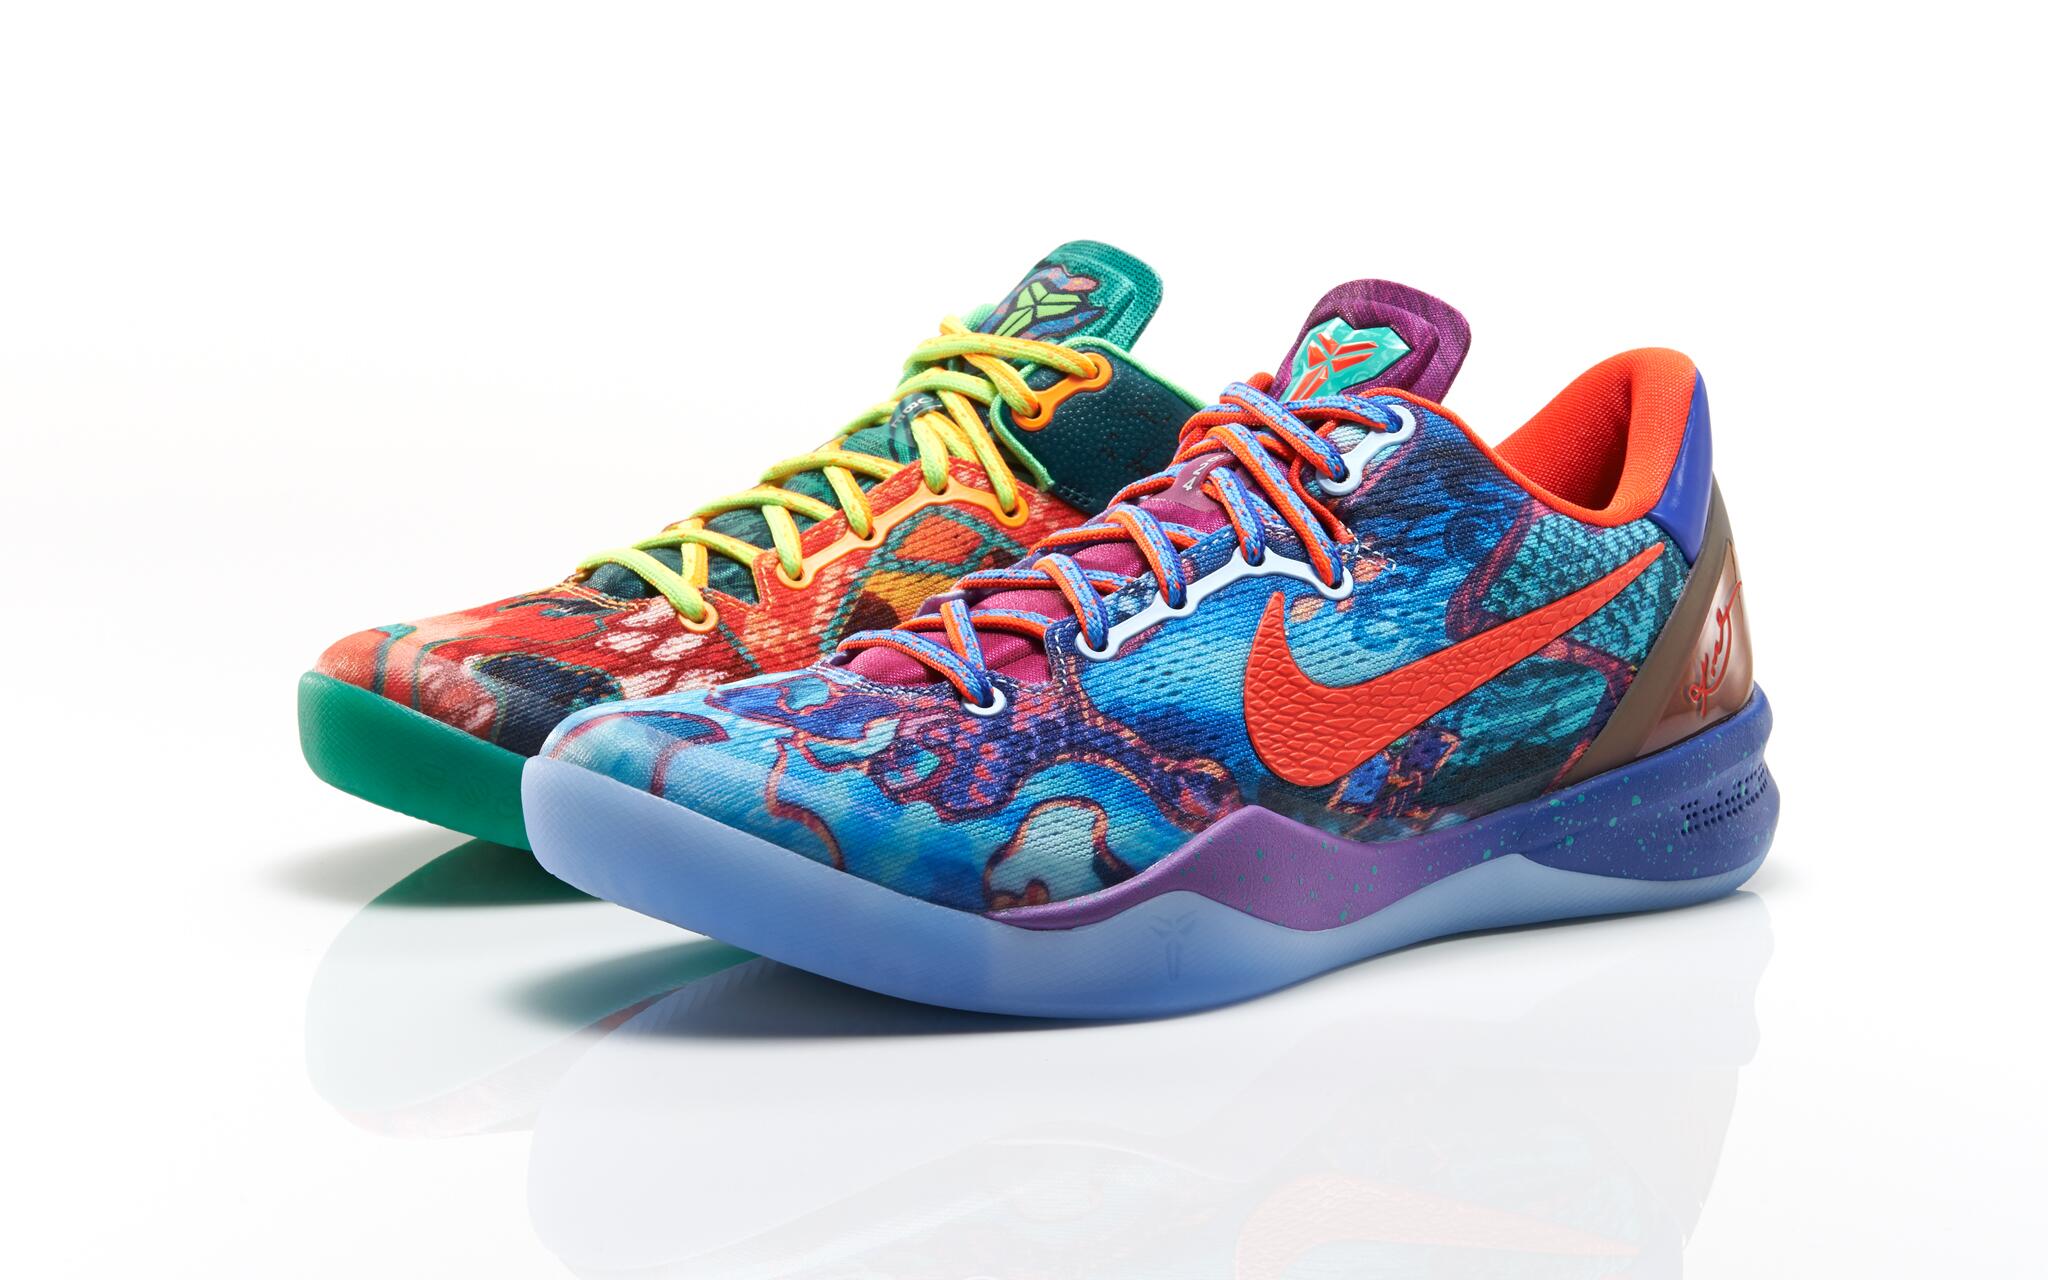 Foot Locker Twitter: "The Nike Kobe 8 "What the Kobe" is now available! BUY HERE: http://t.co/o54evg1Zqj http://t.co/c2WVOHVmFK" / Twitter